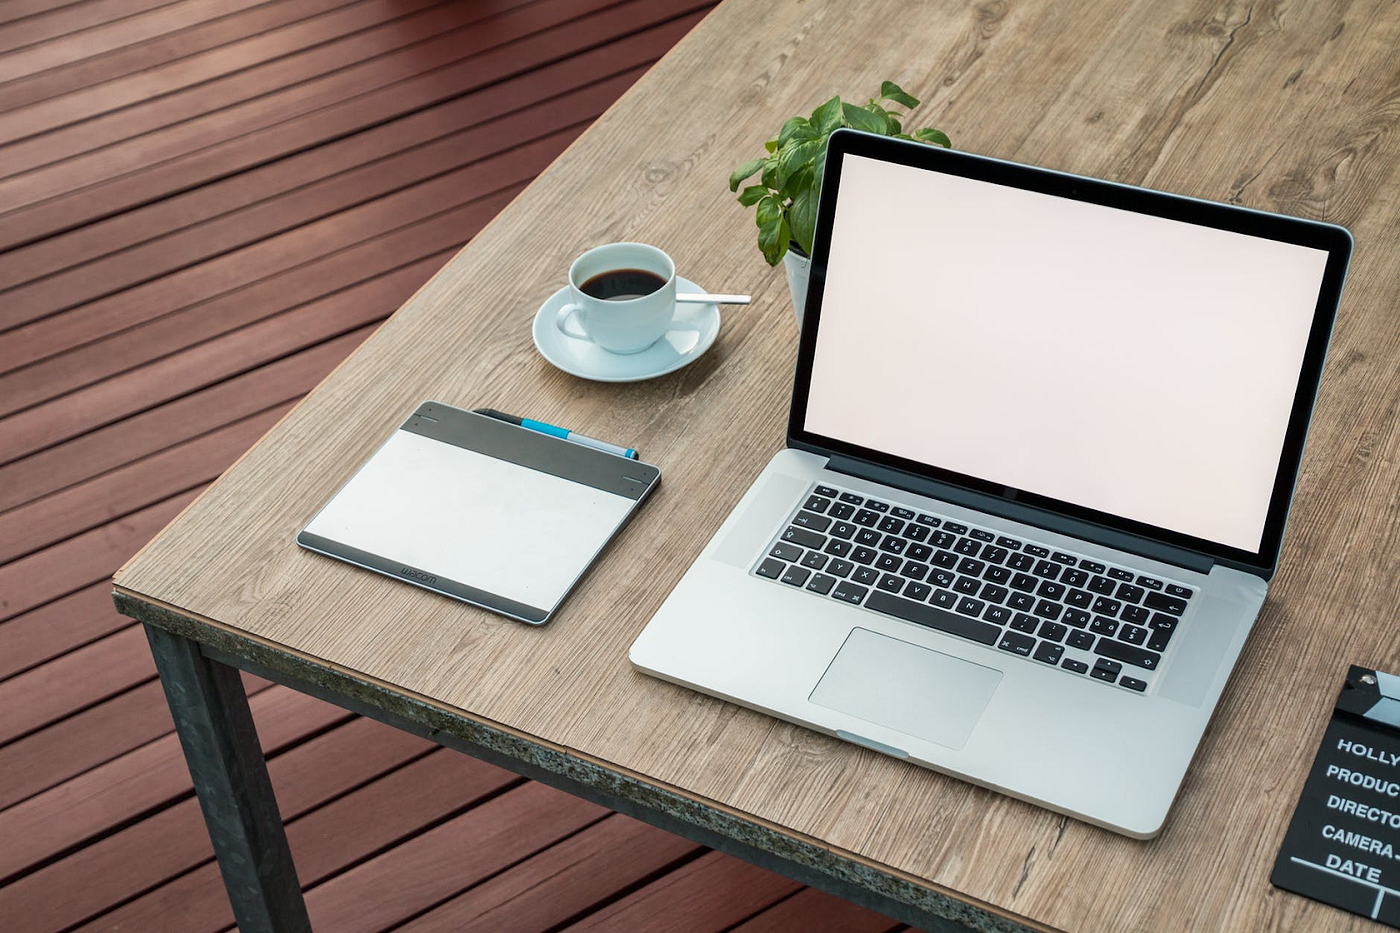 6 Reasons Why You Need A Laptop. Everyone should own a laptop. Laptops… |  by Shecluded | Medium